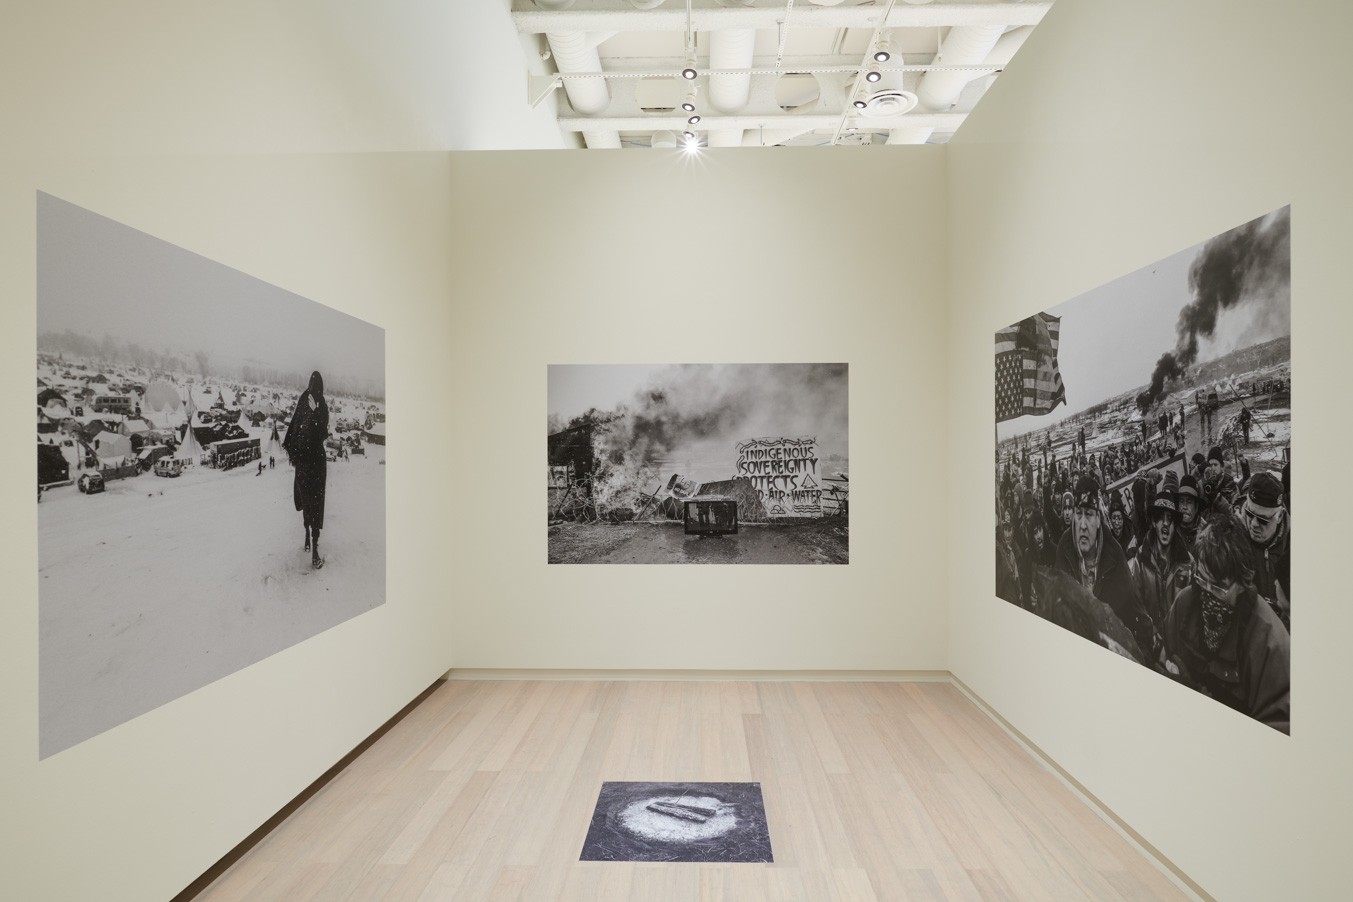 Installation view showing work by the artist Josué Rivas from the exhibition “The Protest and The Recuperation” on view at the Wallach Art Gallery, Columbia University. Photograph by Kyle Knodell.